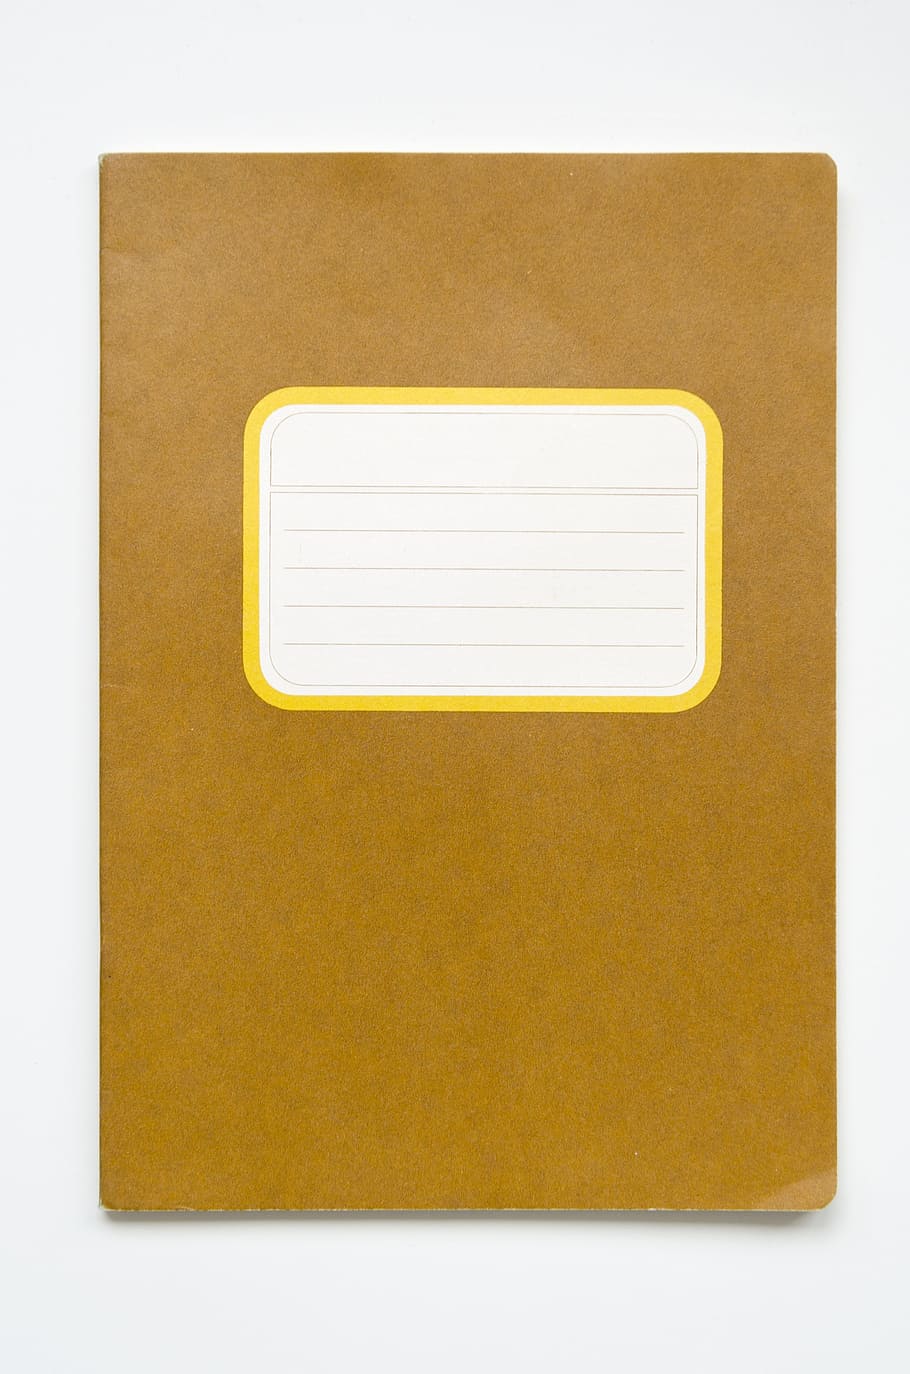 brown folder on white surface, notebook, copybook, exercise book